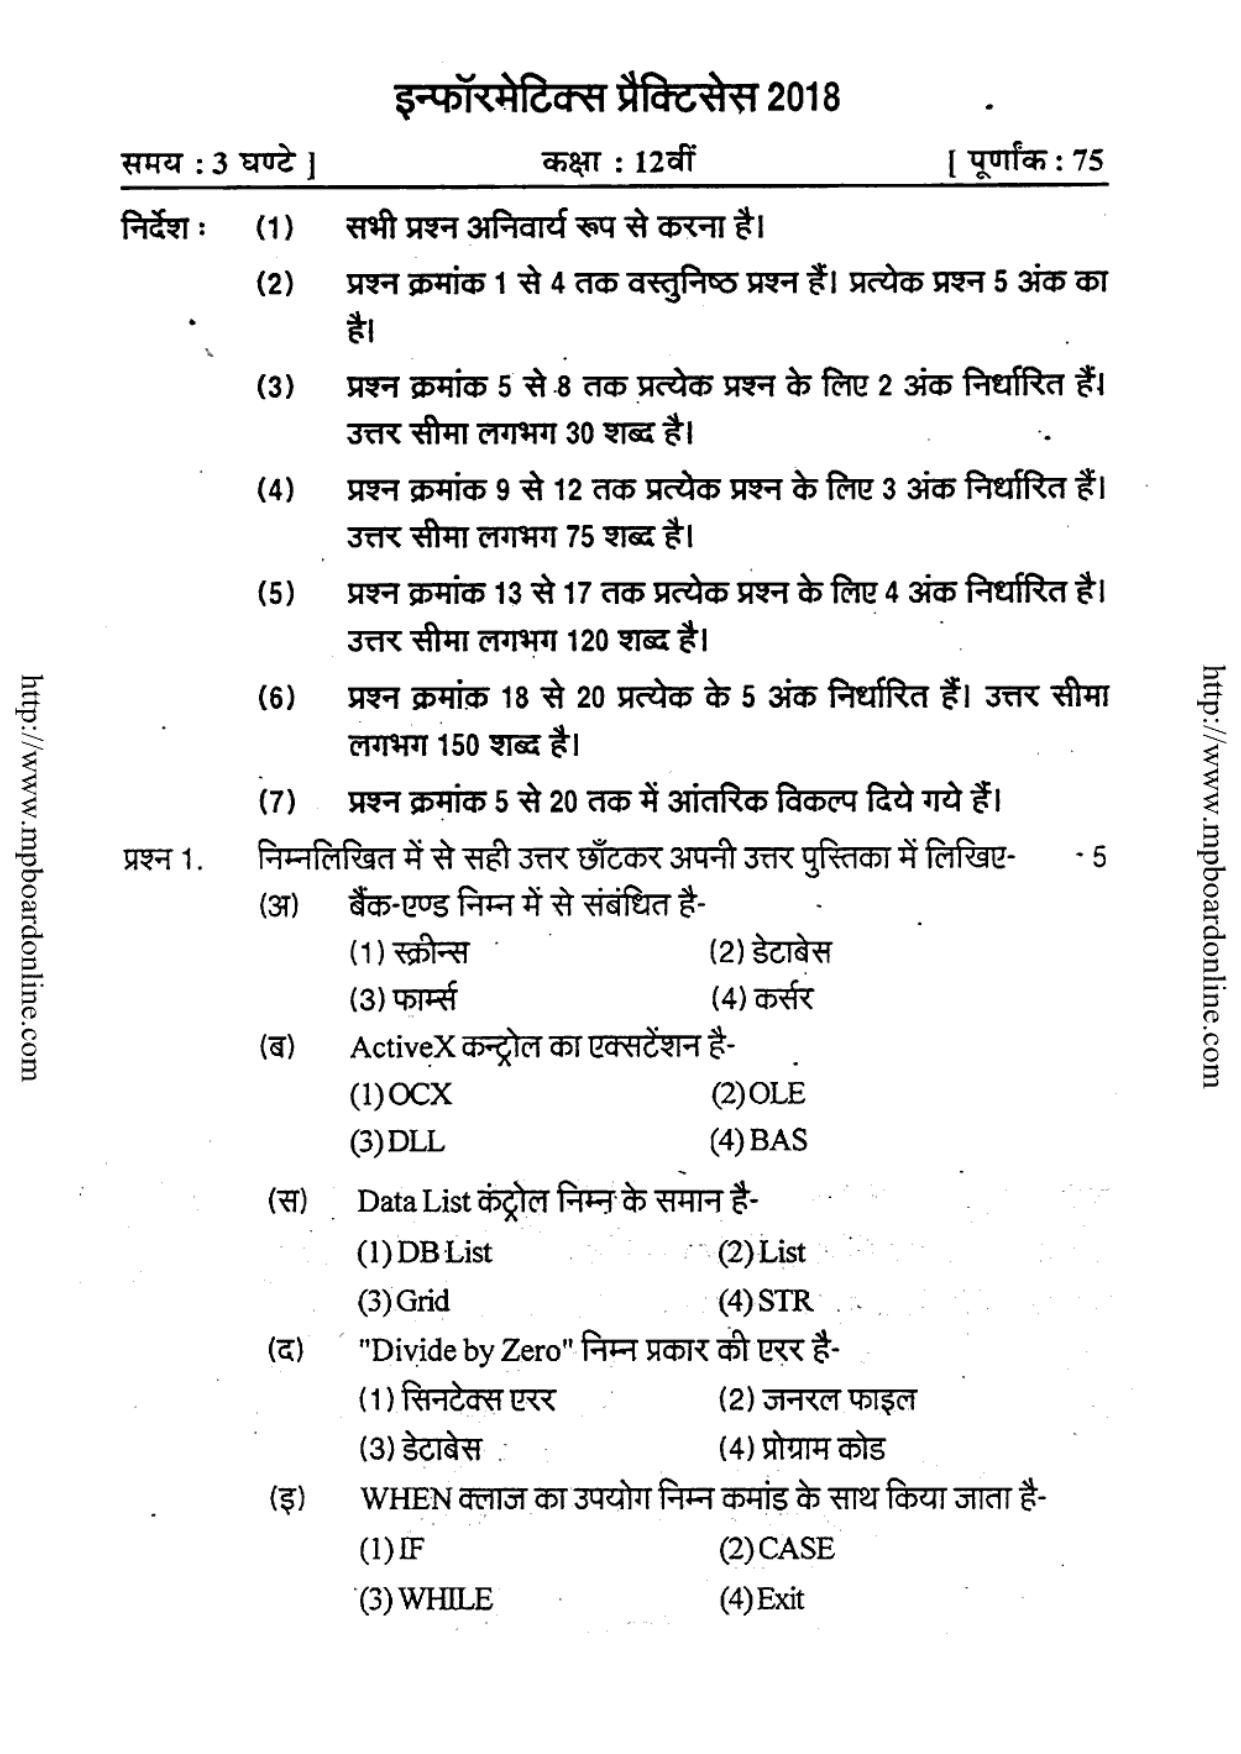 MP Board Class 12 Informatics Practices 2018 Question Paper - Page 1